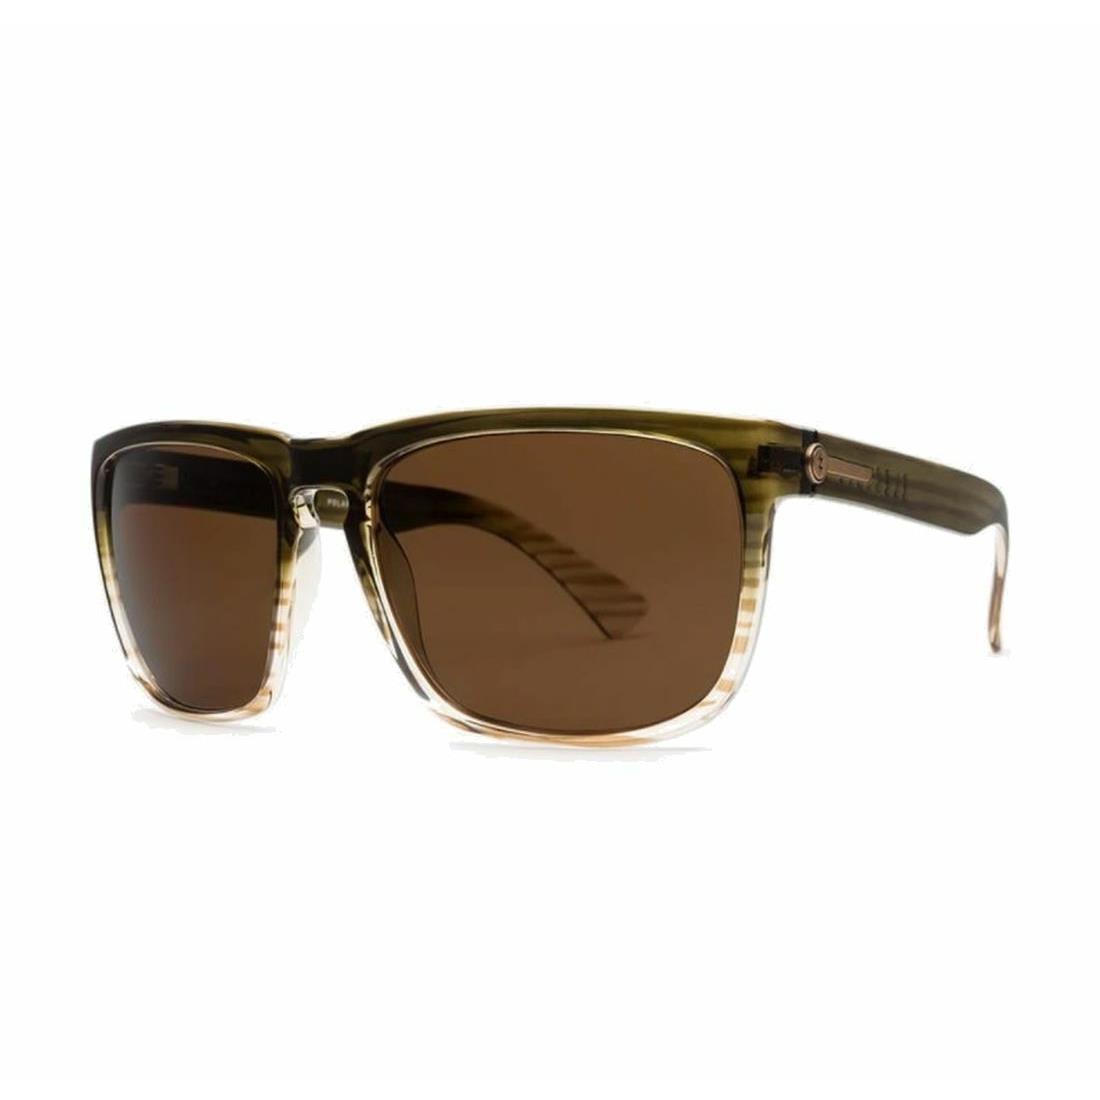 Electric Knoxville XL Sunglasses Red Wood with Bronze Polarized Lens - Frame: Red Wood, Lens: